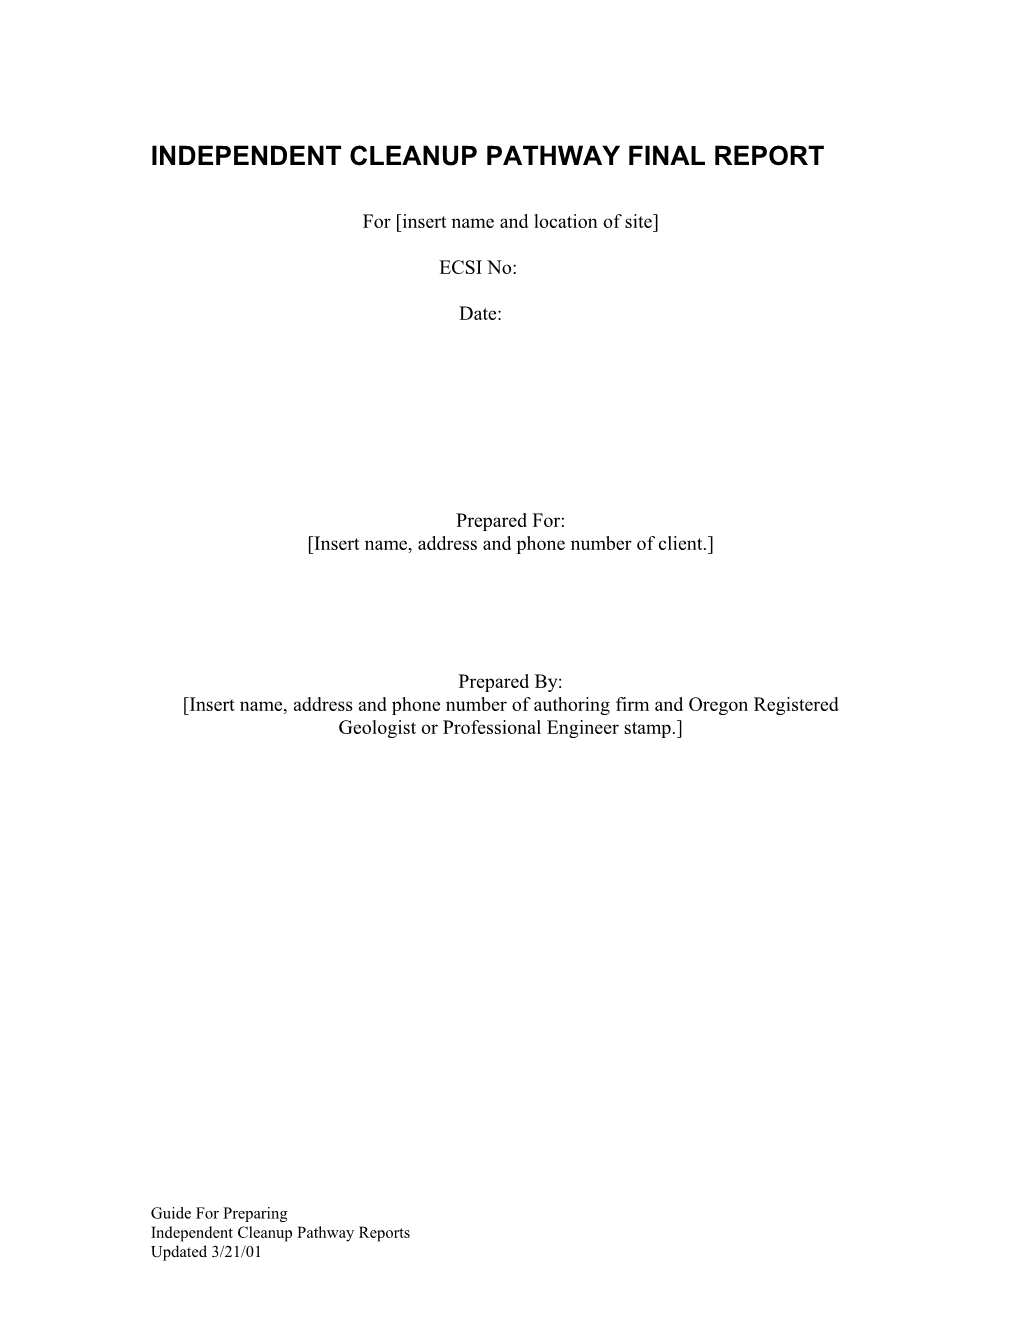 Independent Cleanup Pathway Final Report Outline